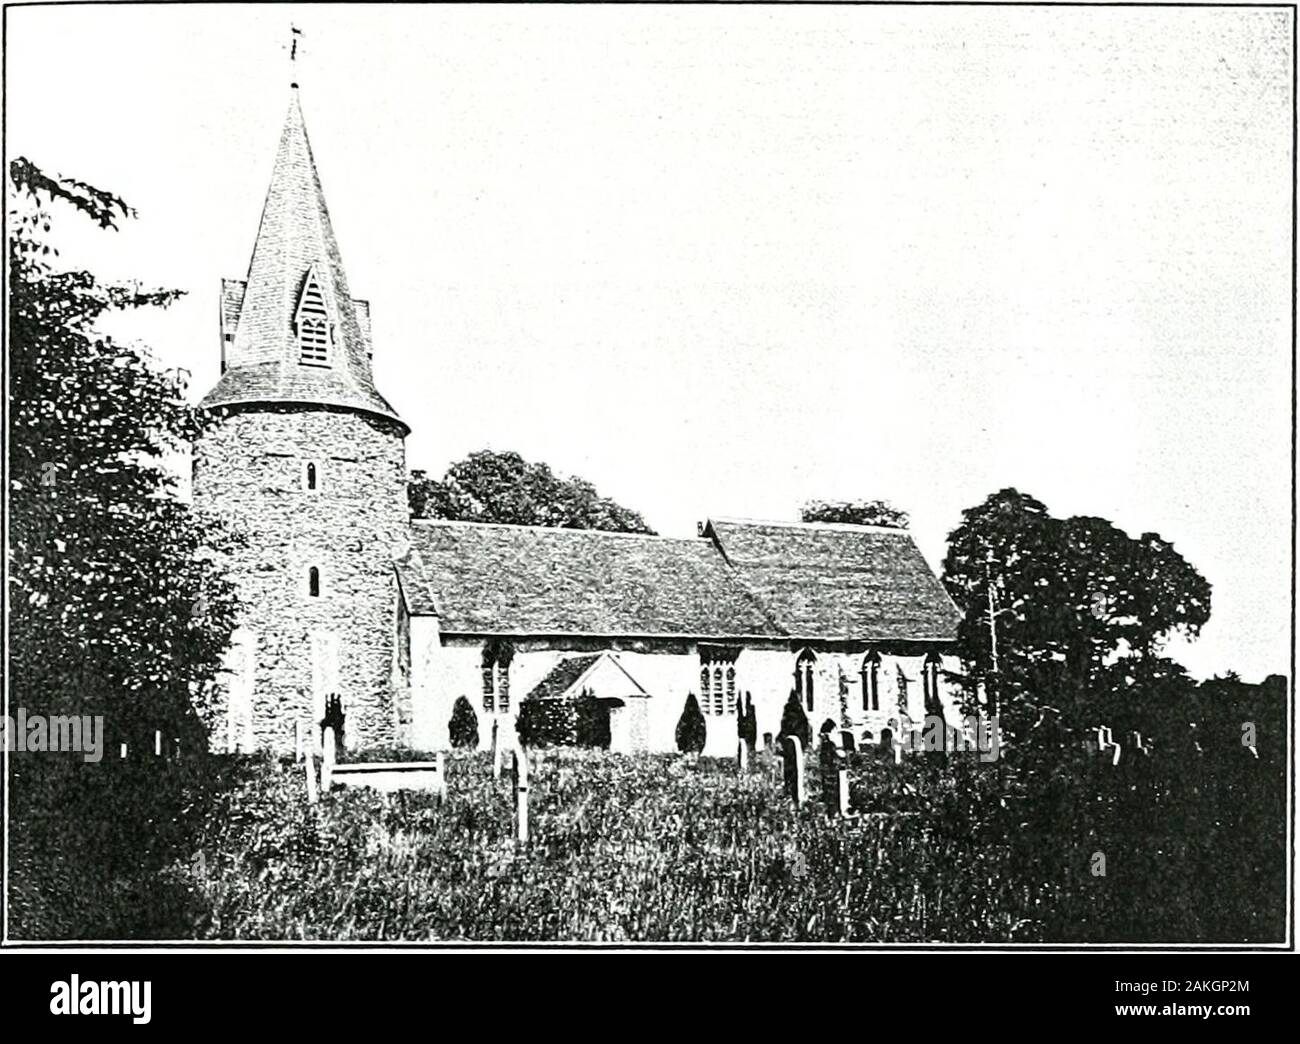 The Kelloggs in the Old world and the New . TEiuoi; OF ST. yi and all saints church, DKBDEN. exglaxd.. ST. :^rAr!Y s CHriiCii, great leighs, exglaxd. Stock Photo